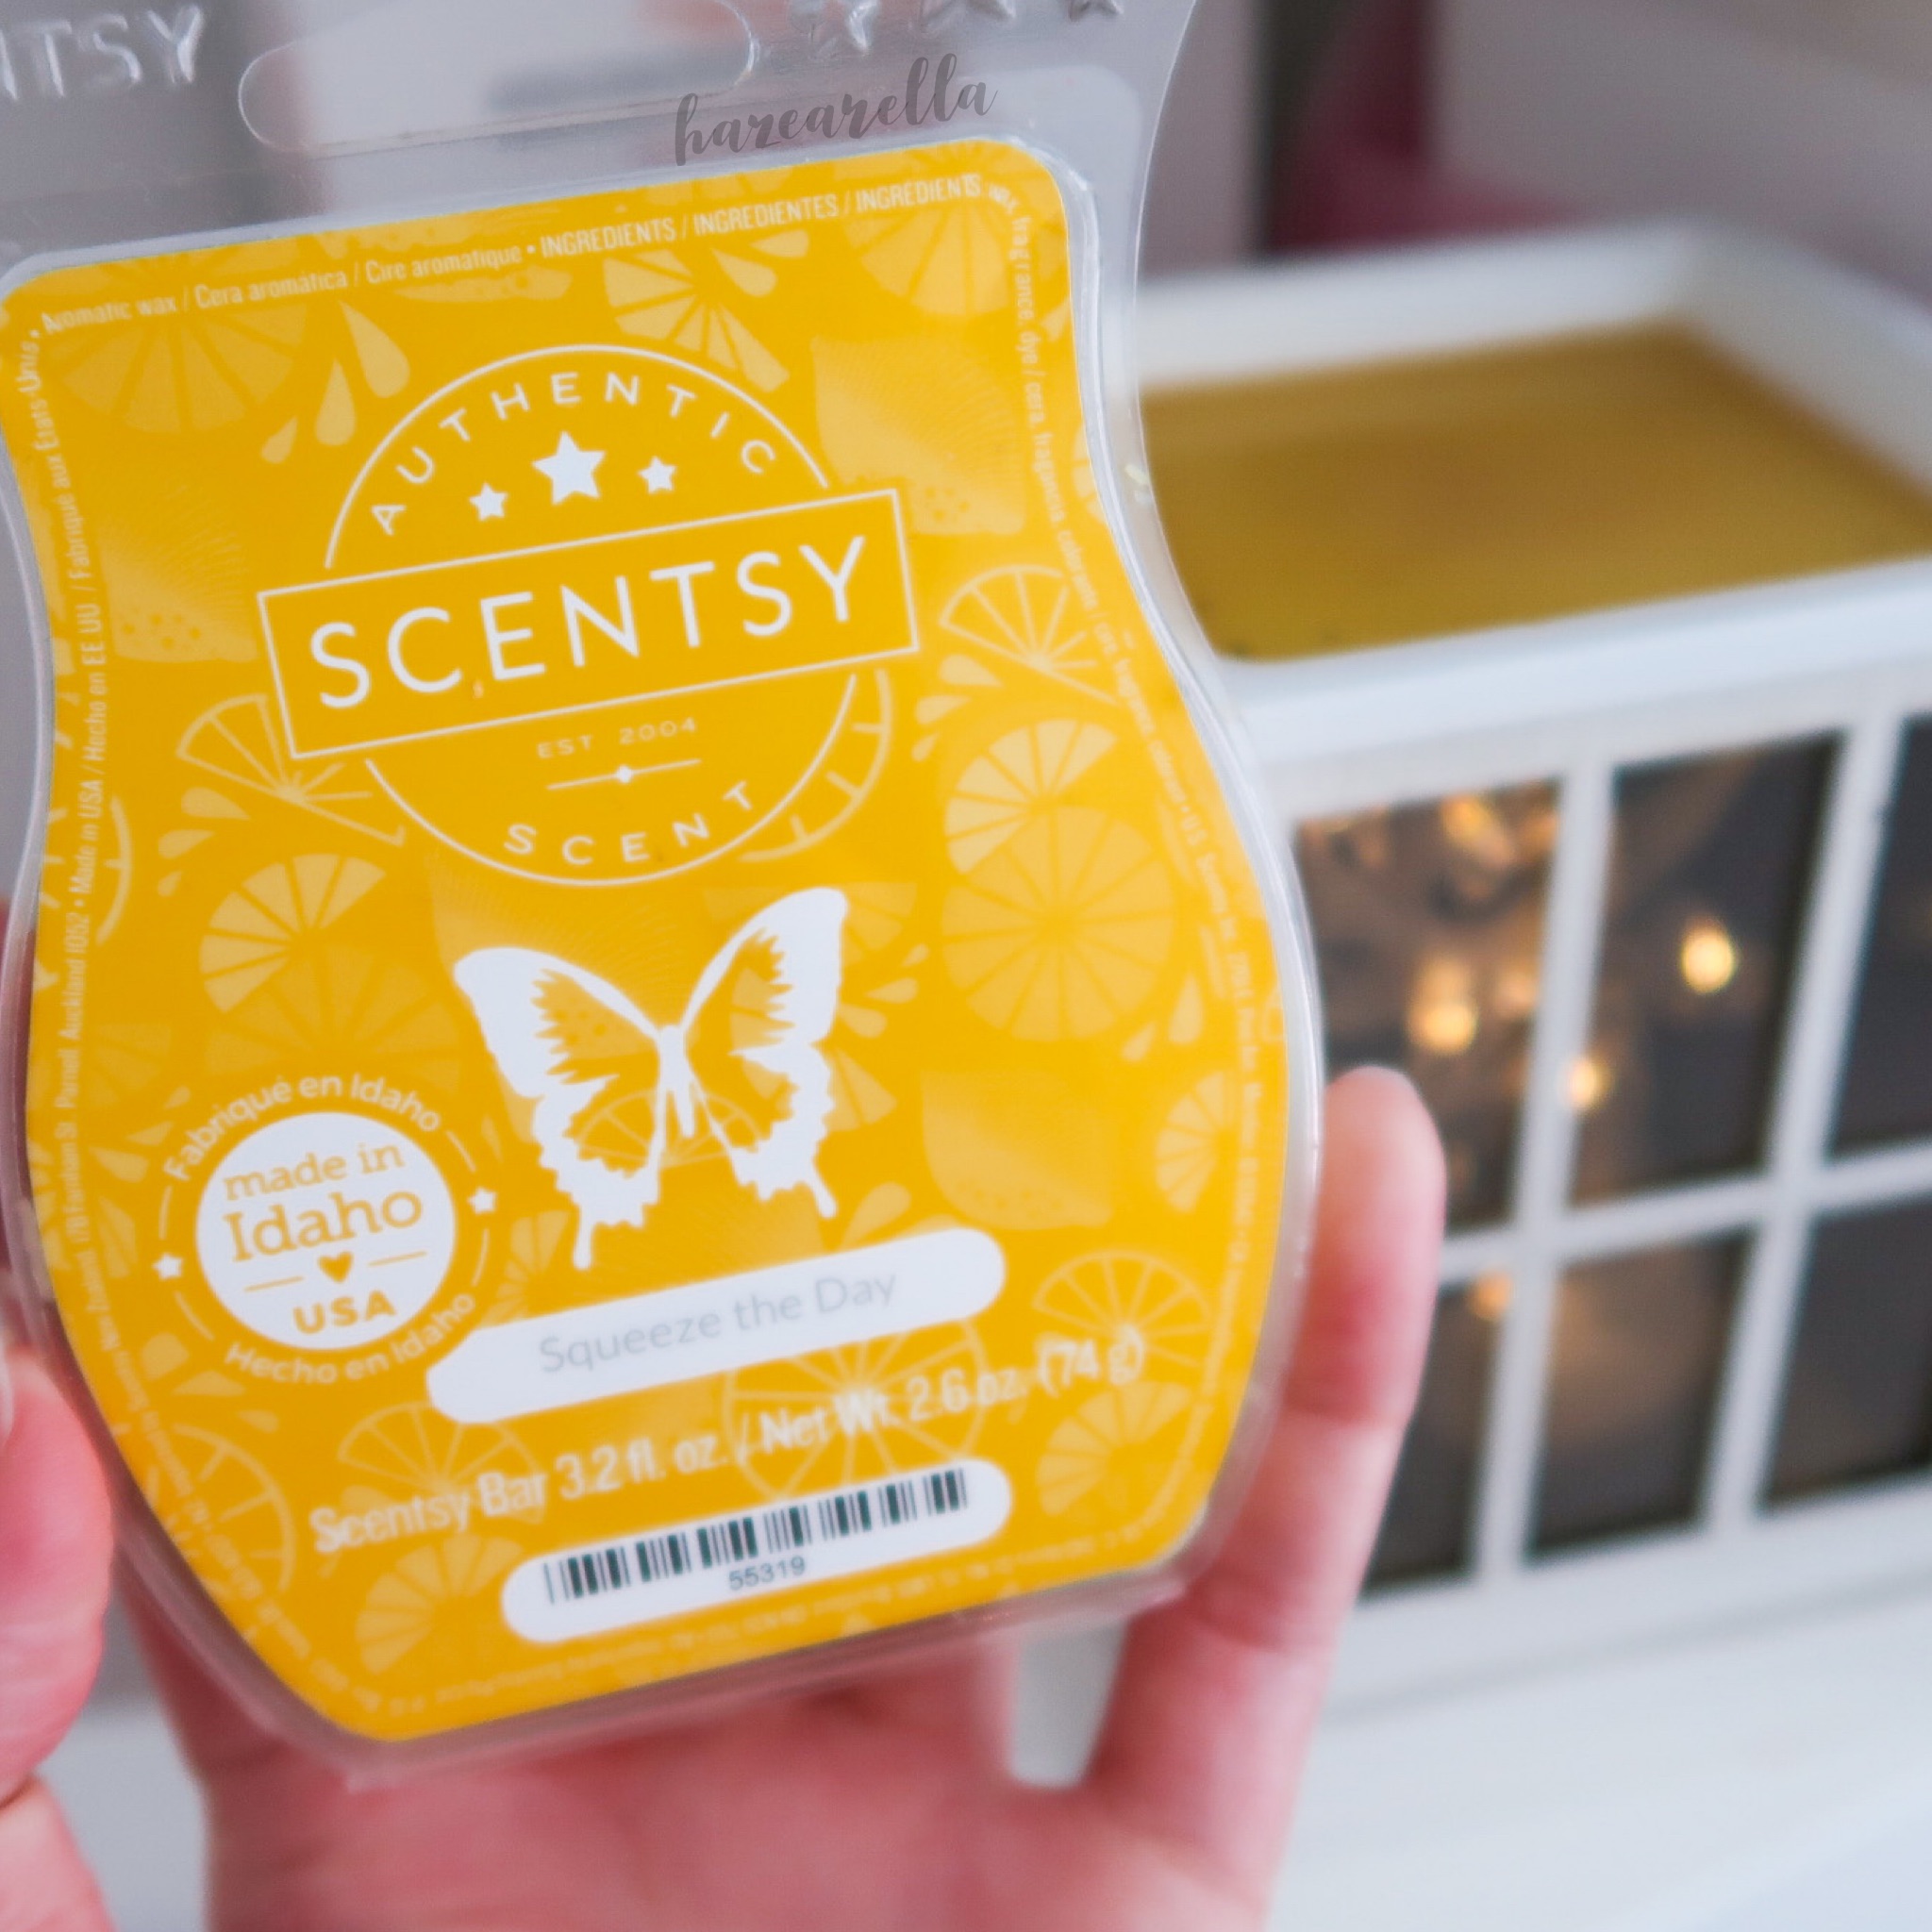 Scentsy & Home Fragrance Reviews